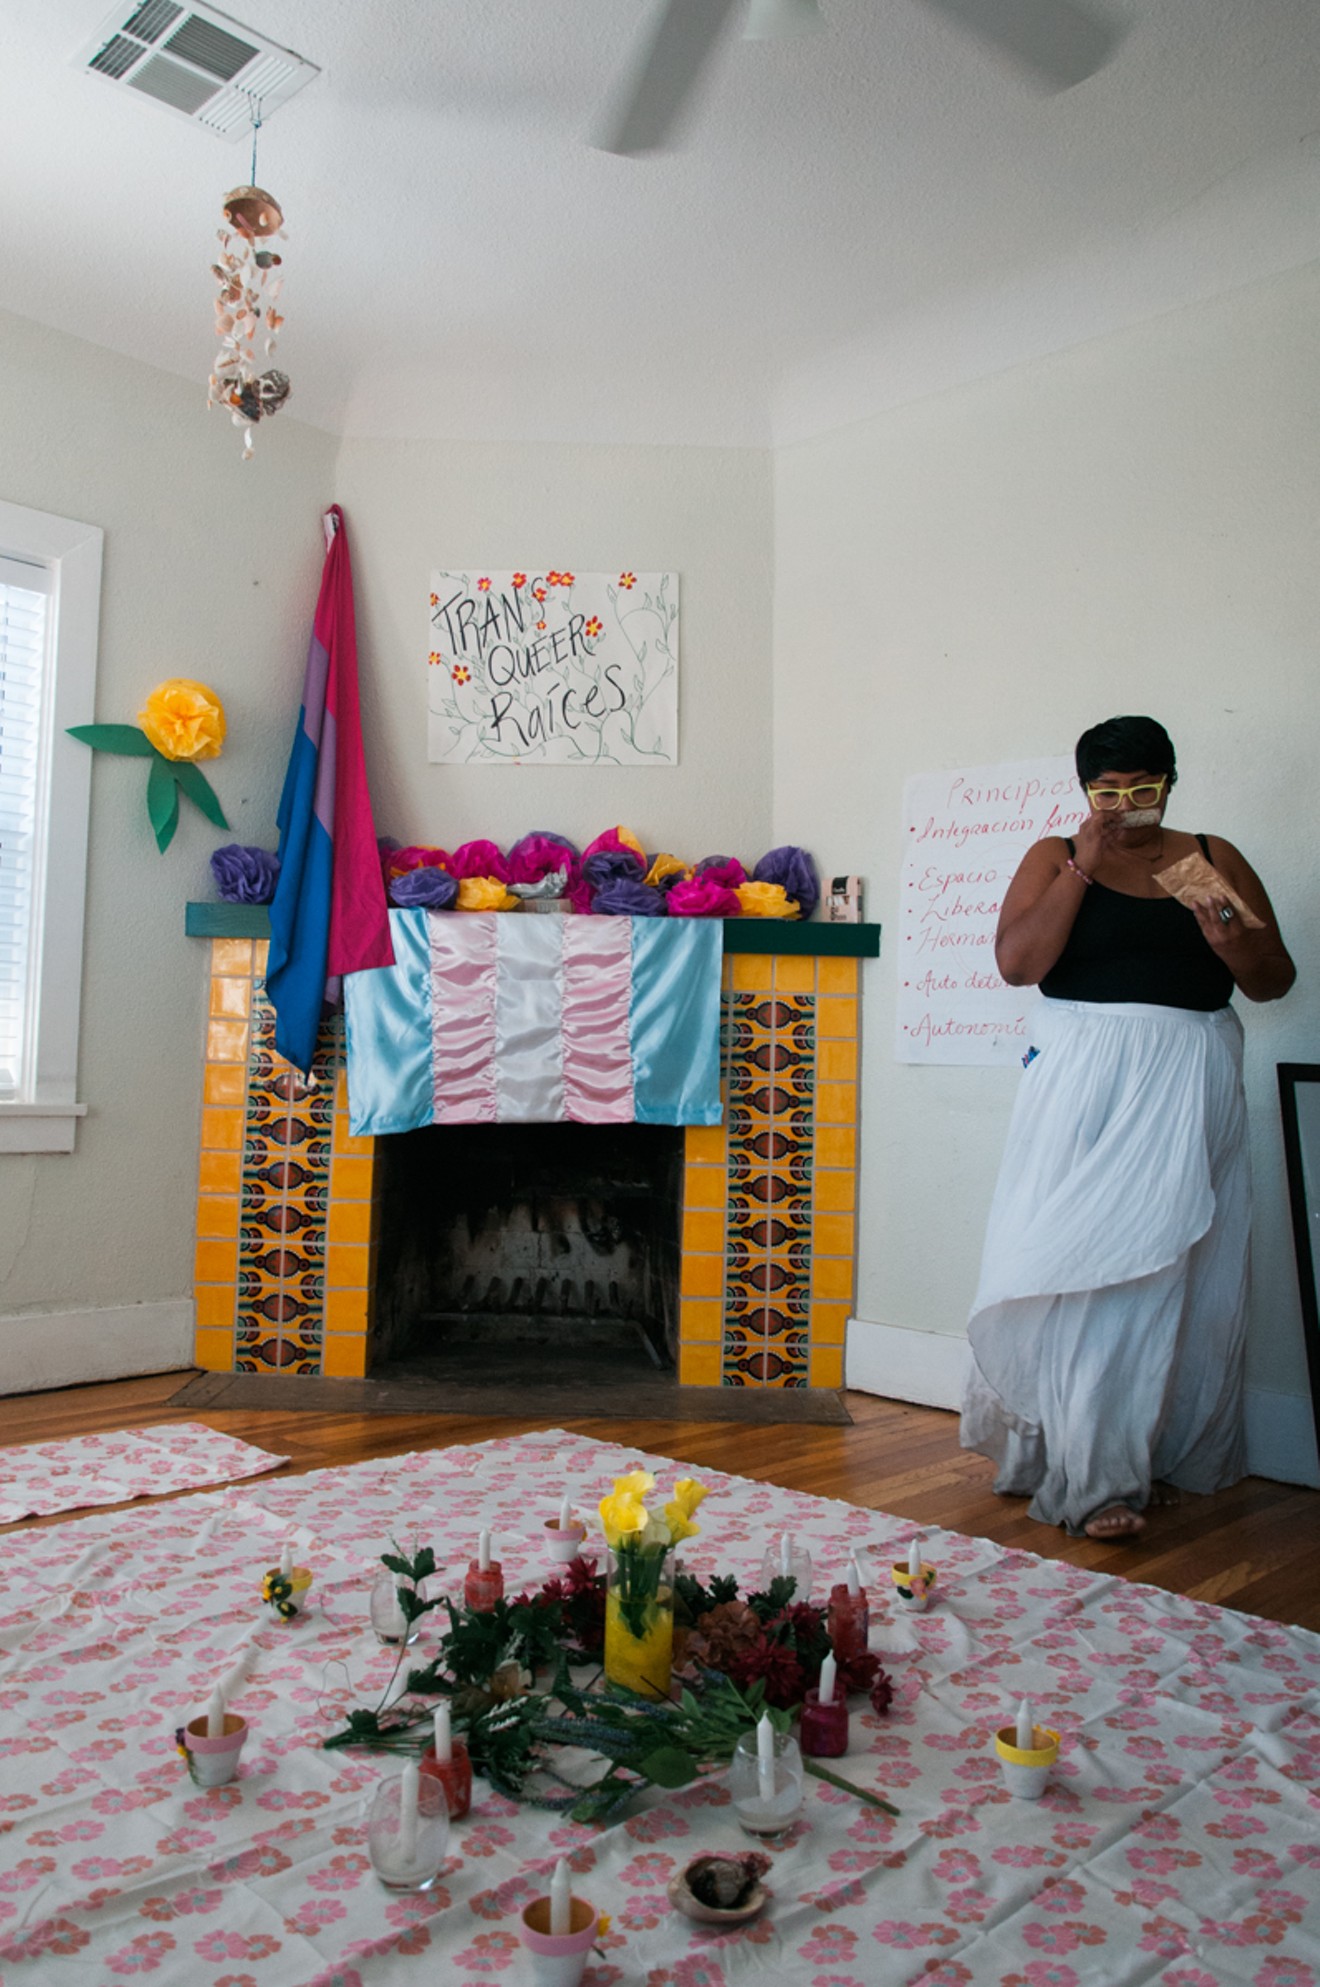 Cynthia Domenzain, 23, from Phoenix, looks over preparations made for Trans Queer Pueblo's healing circle.